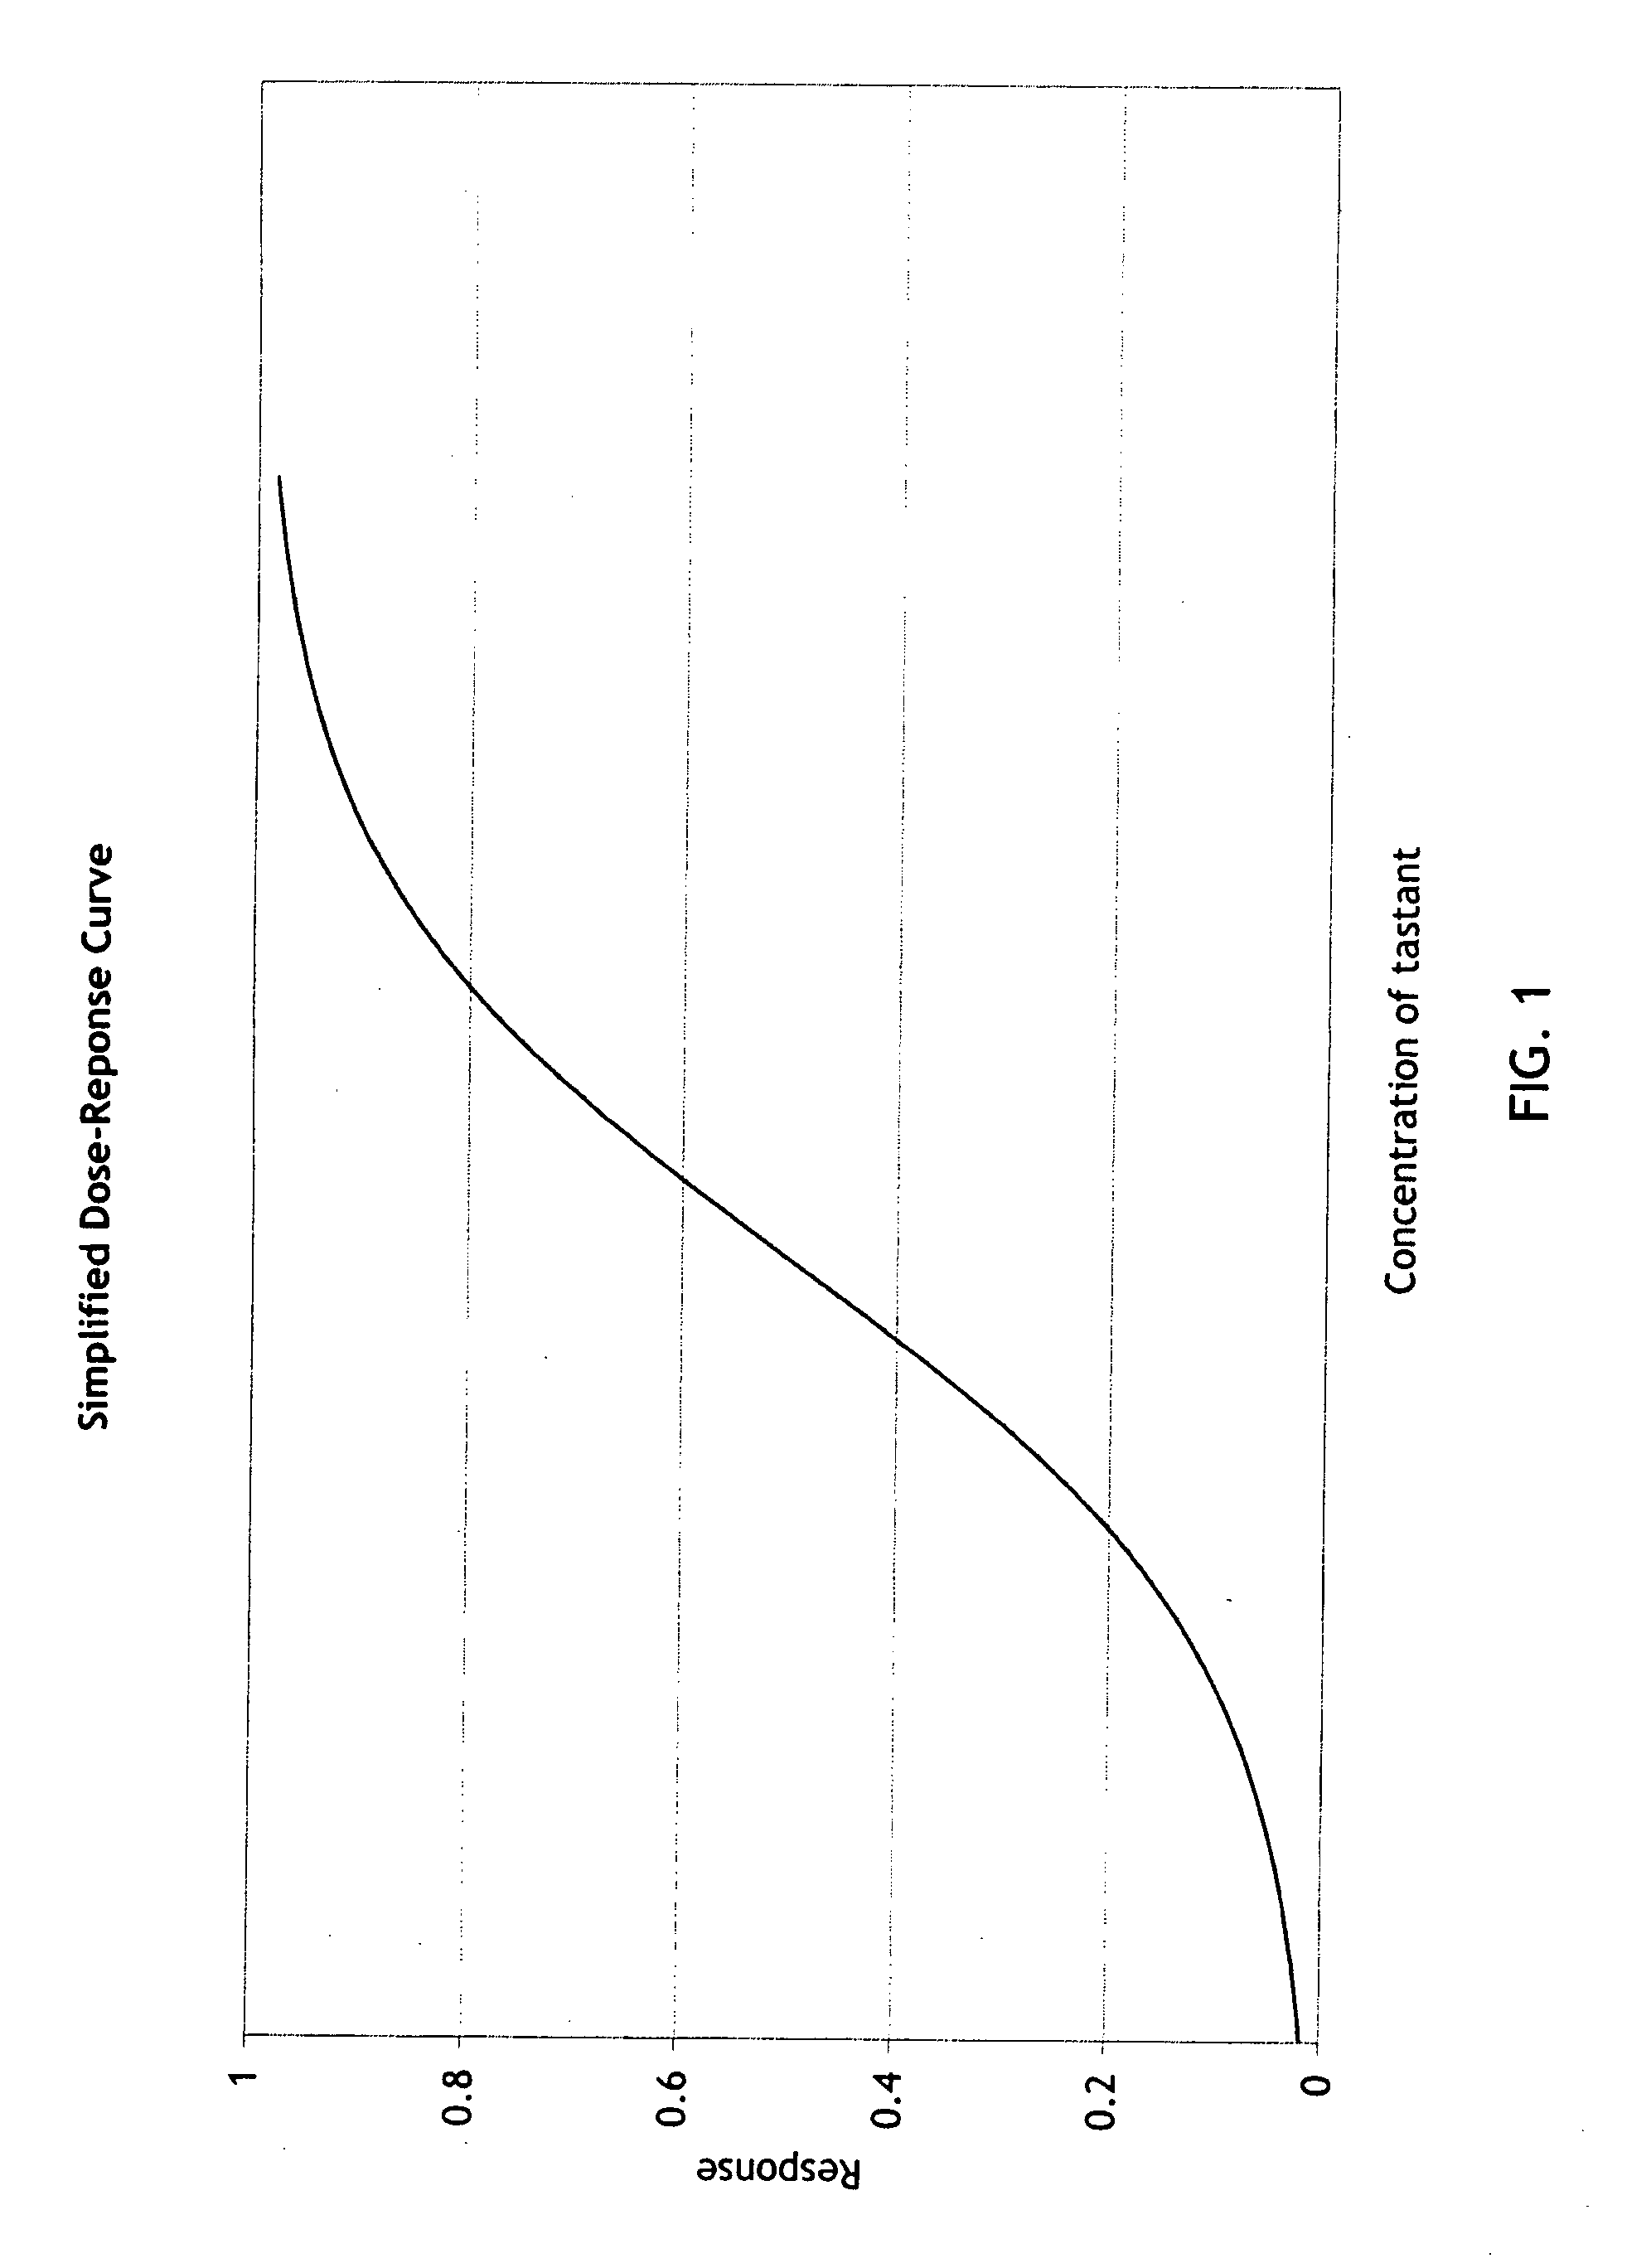 Seasoning and method for seasoning a food product while reducing dietary sodium intake